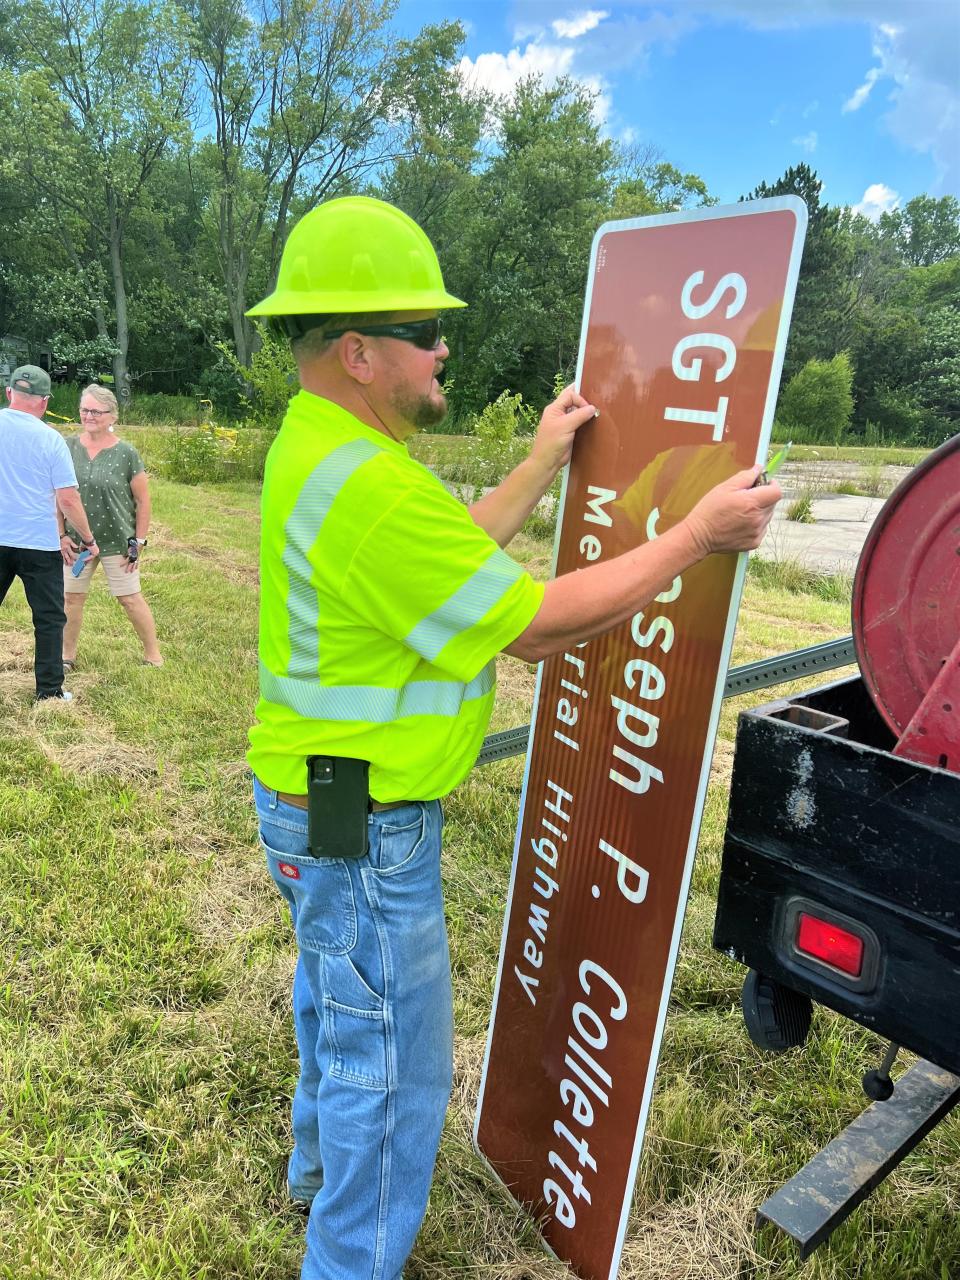 Ohio Department of Transportation employee Lenny Sheets prepares to erect a sign at Ohio 158 and Ginder Road honoring Army Sg.t Joseph Collette. Collette was killed in action while serving in Afghanistan in March 2019.